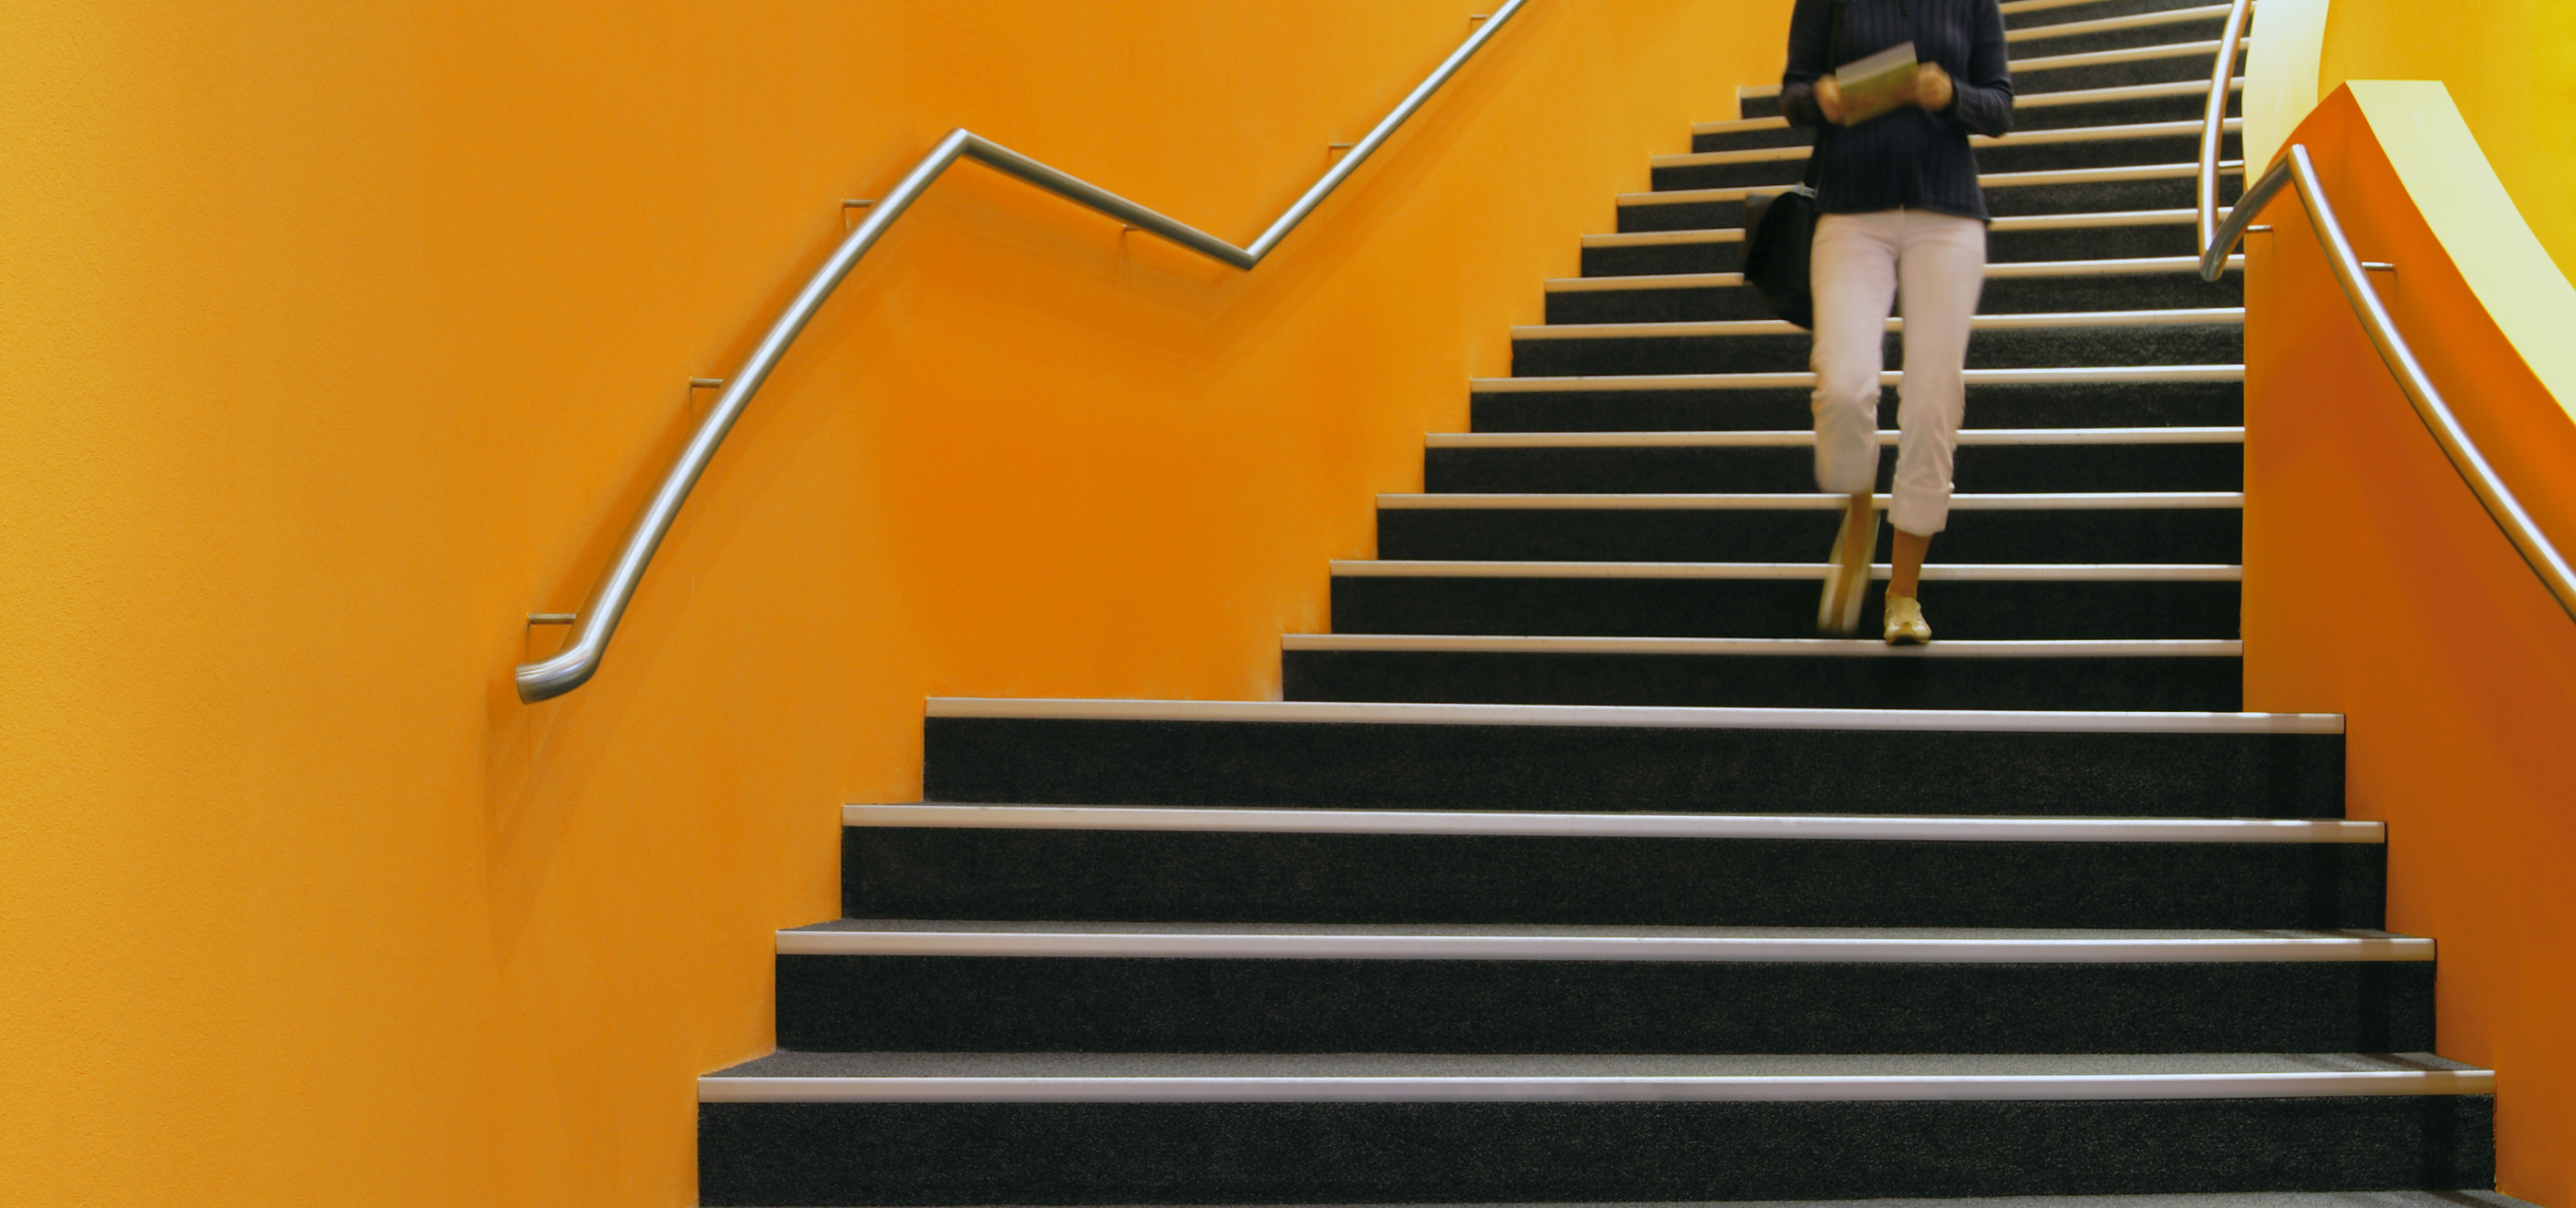 A young woman carrying a book in both hands descends a curved staircase in a public building.